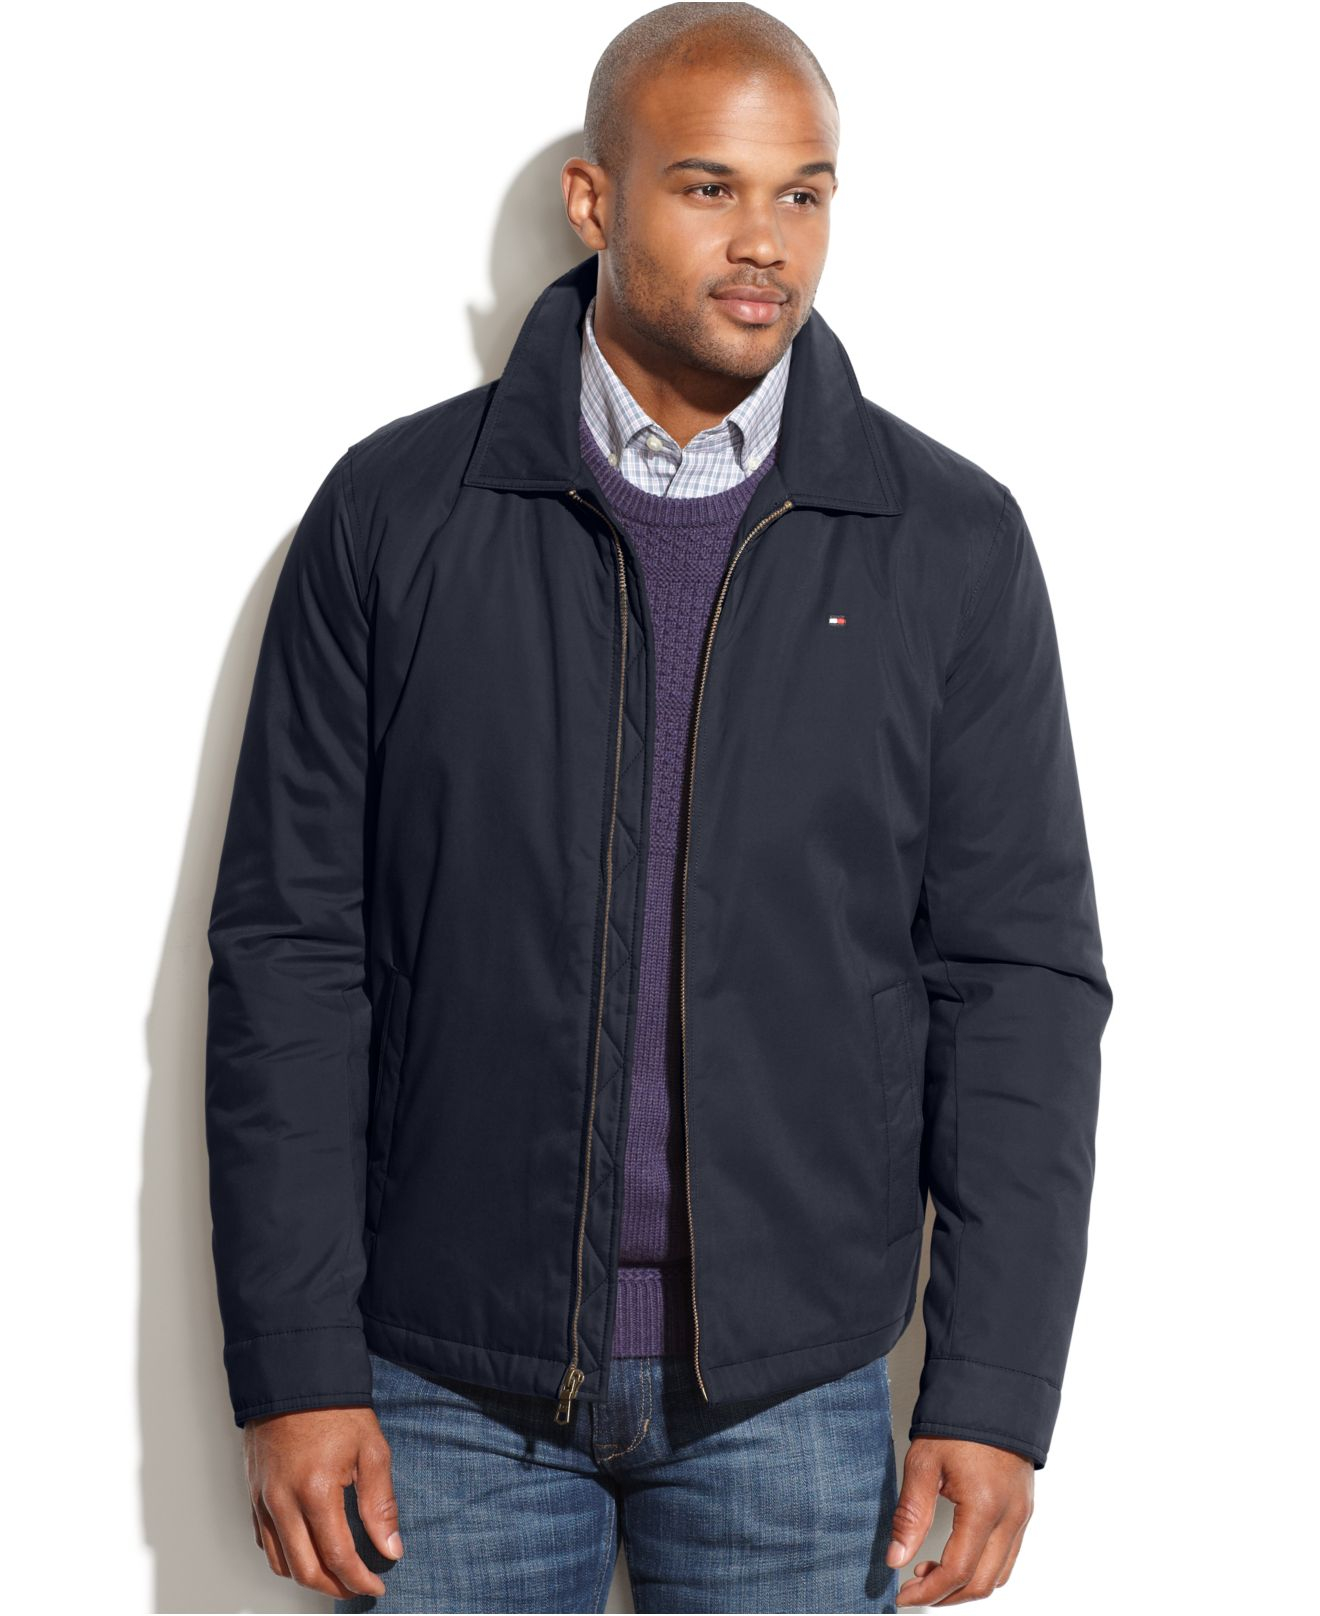 Lyst - Tommy Hilfiger Big And Tall Lightweight Microtwill Jacket in ...